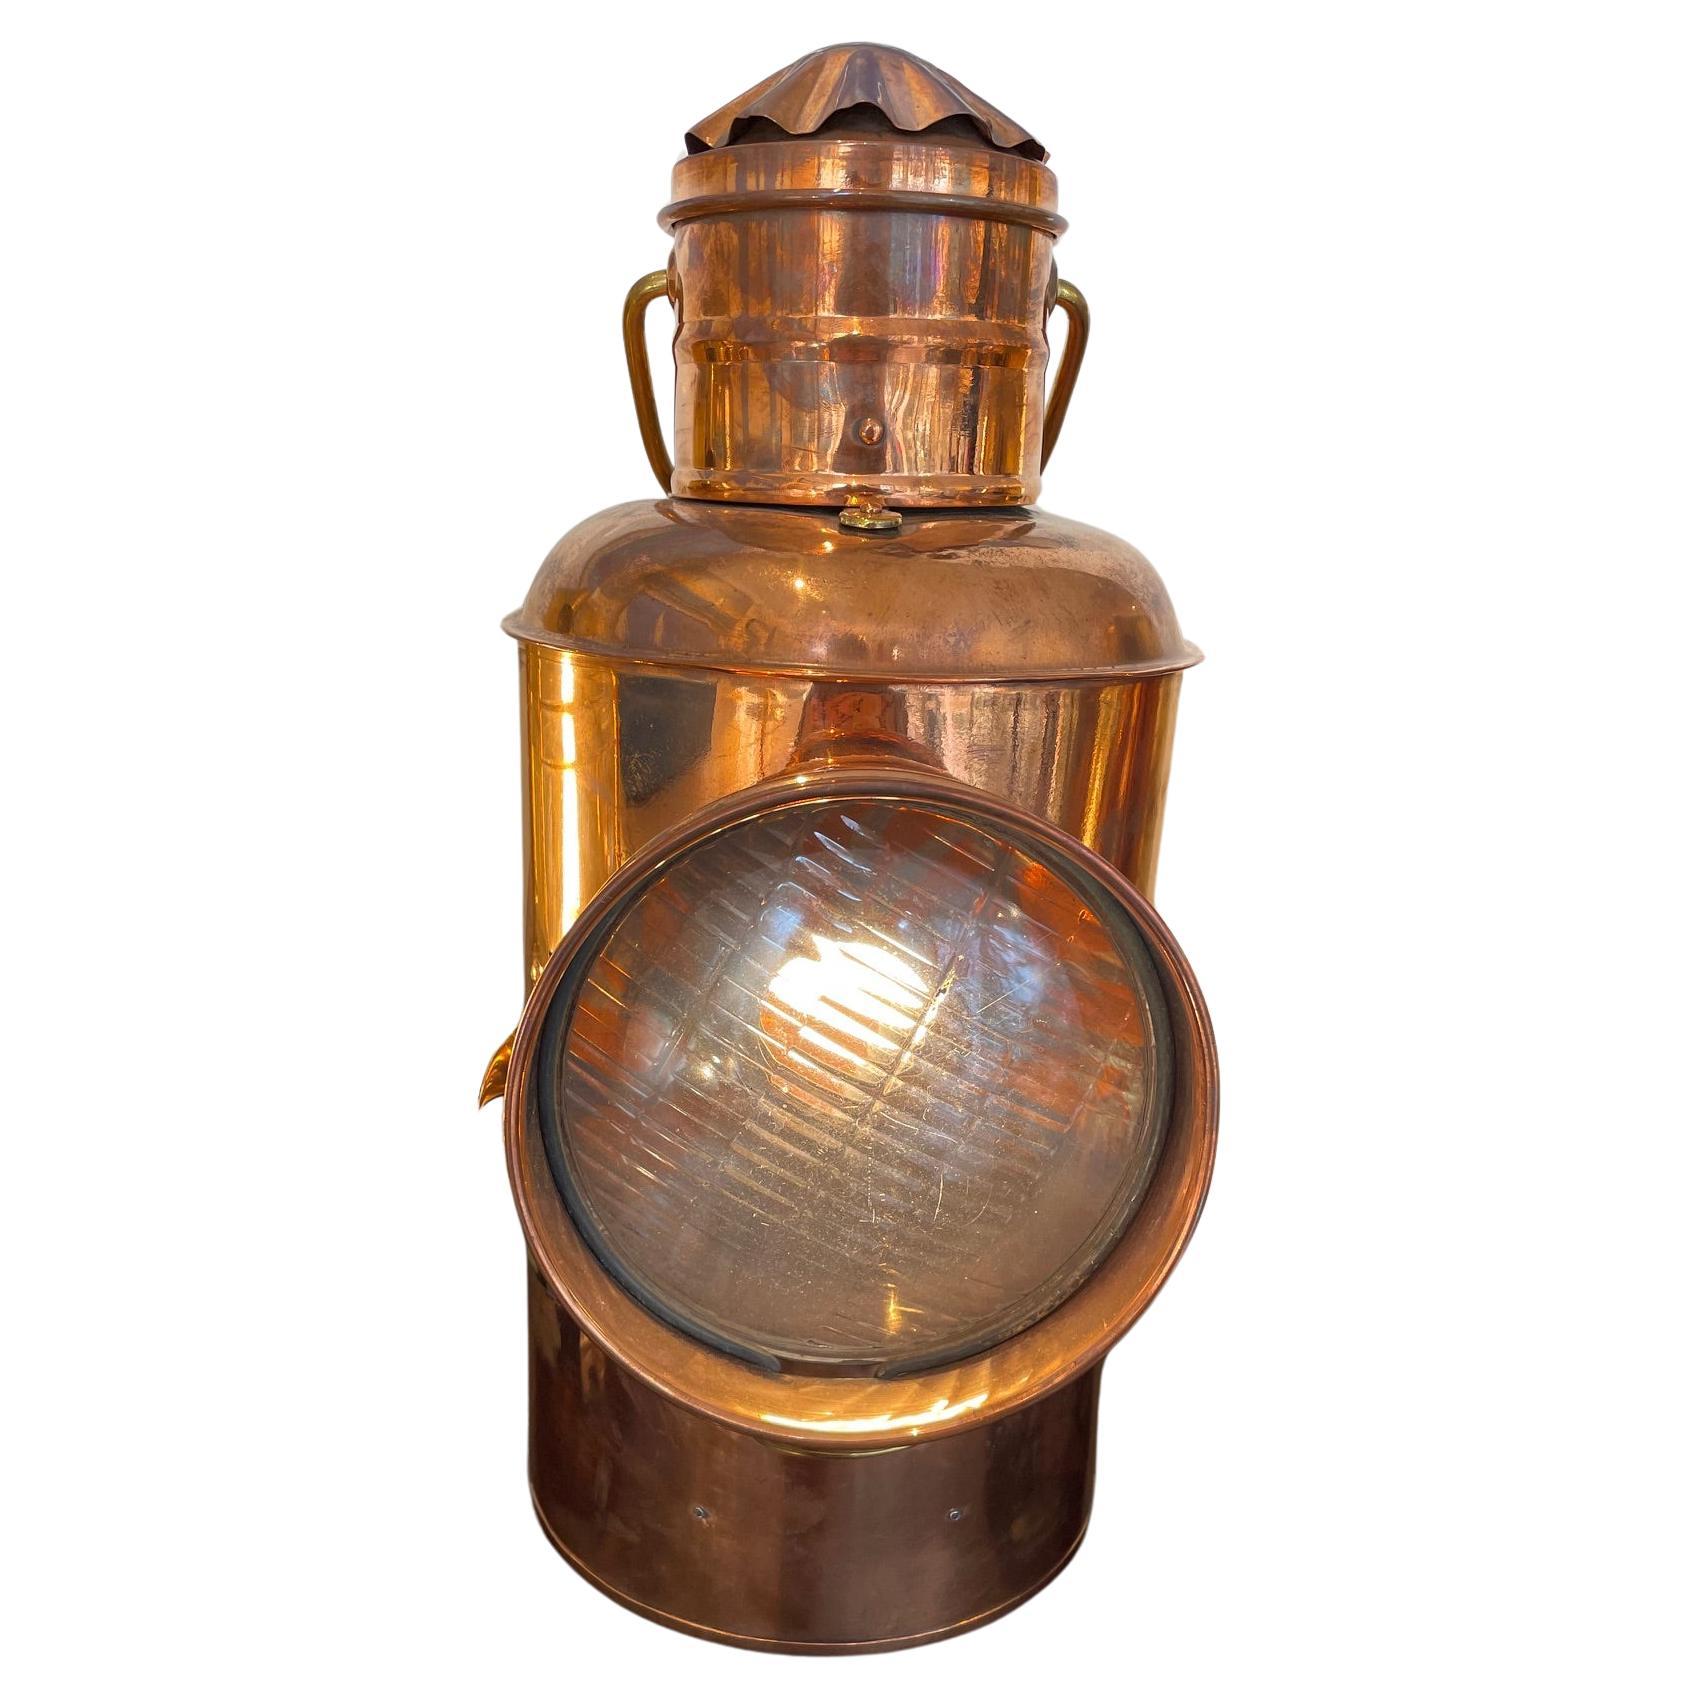 A rare ship's copper shutter signal light with a round Fresnel lens.  The shutter on the side is used for transmitting Morse Code.  The back has a door that gains access to the oil lamp and has a slide latch to stay closed.  We also had it converted